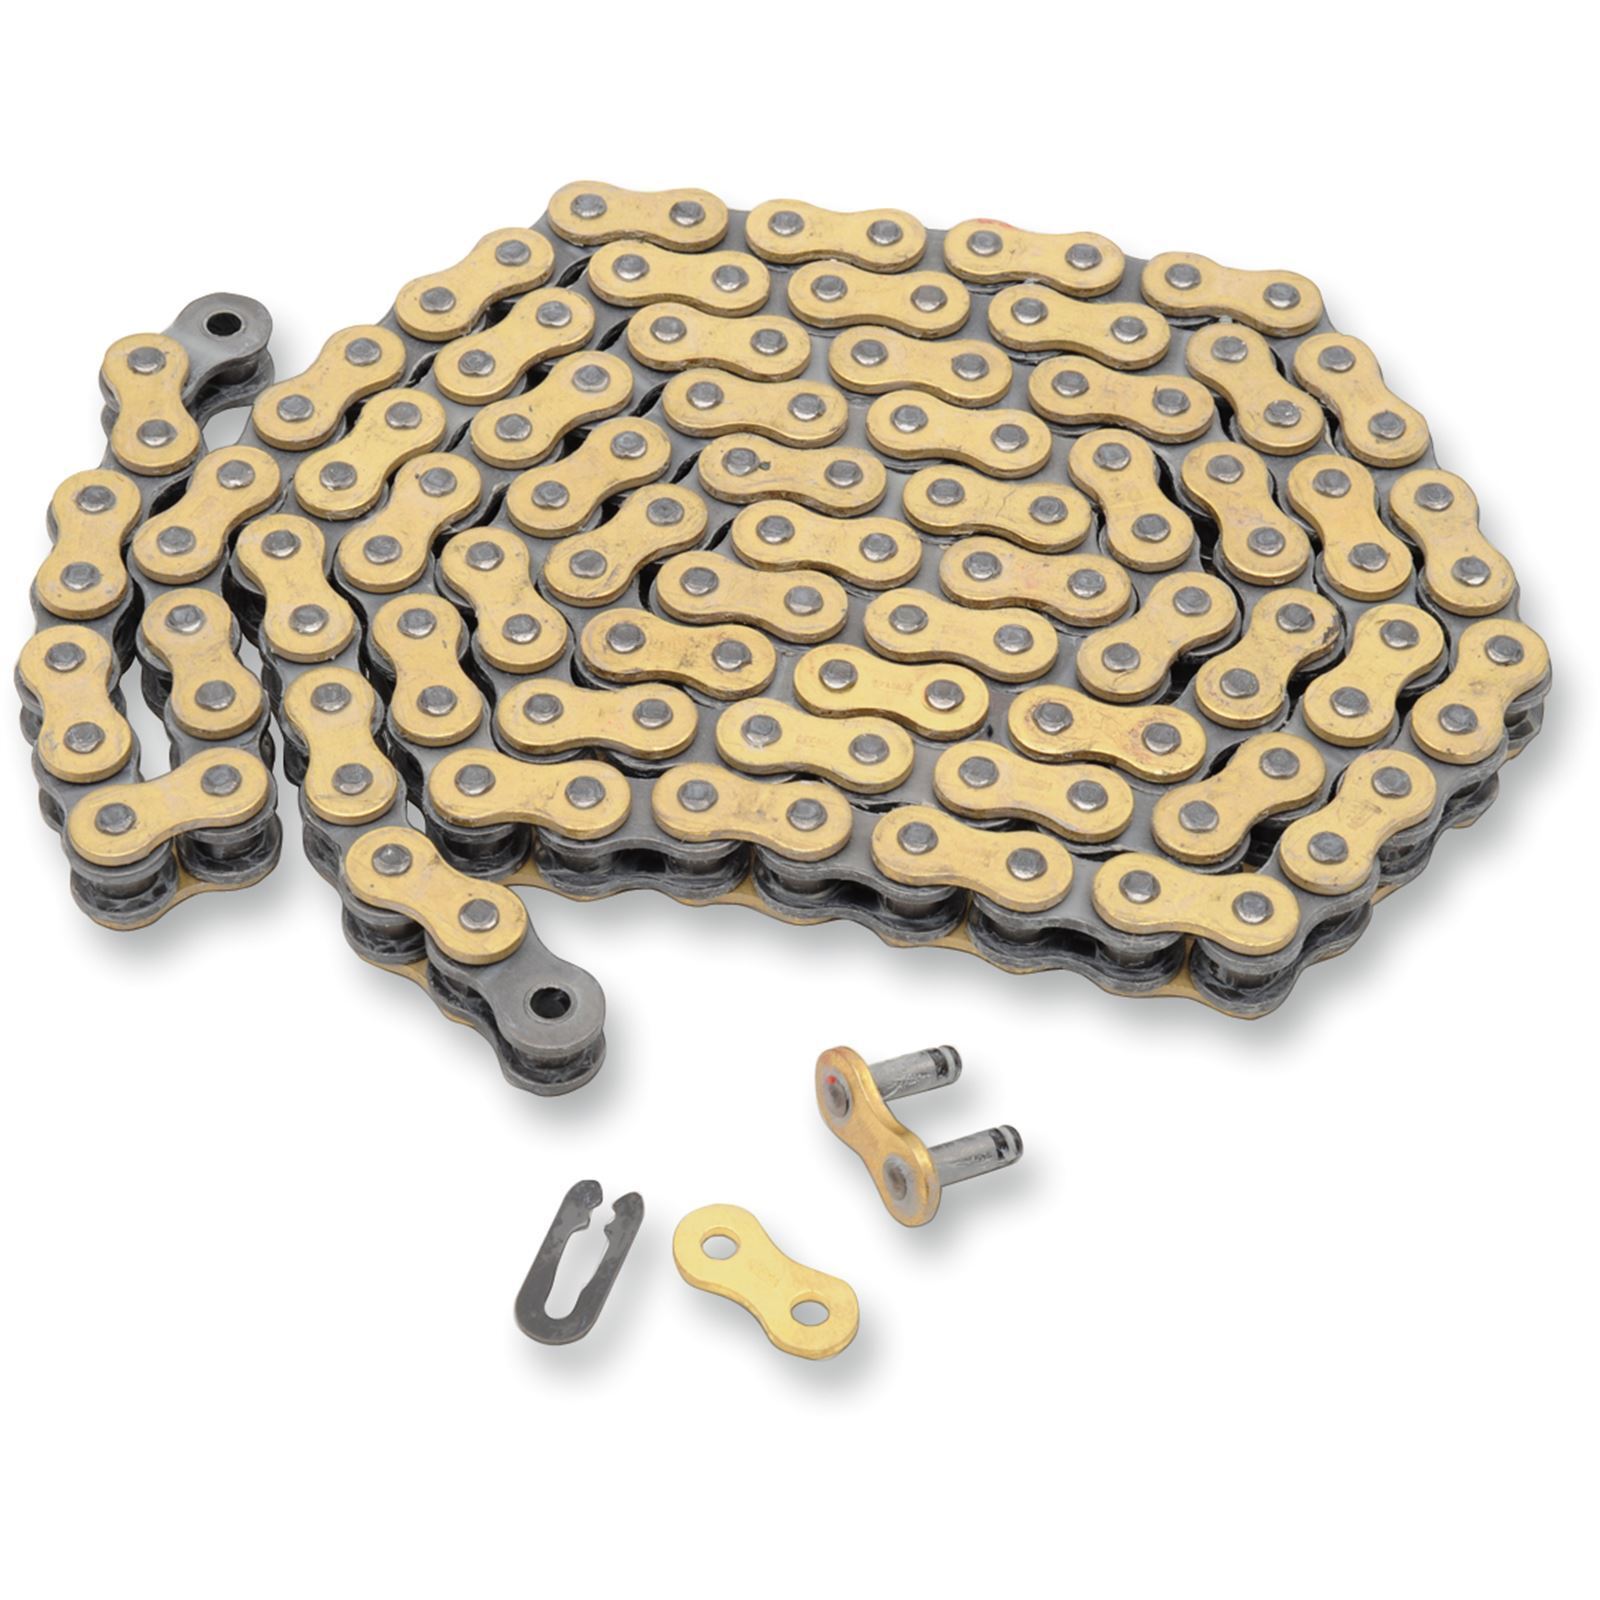 Regina 520 DR -Extra - Drag Racing Chain - 170 Links 135DR/1006